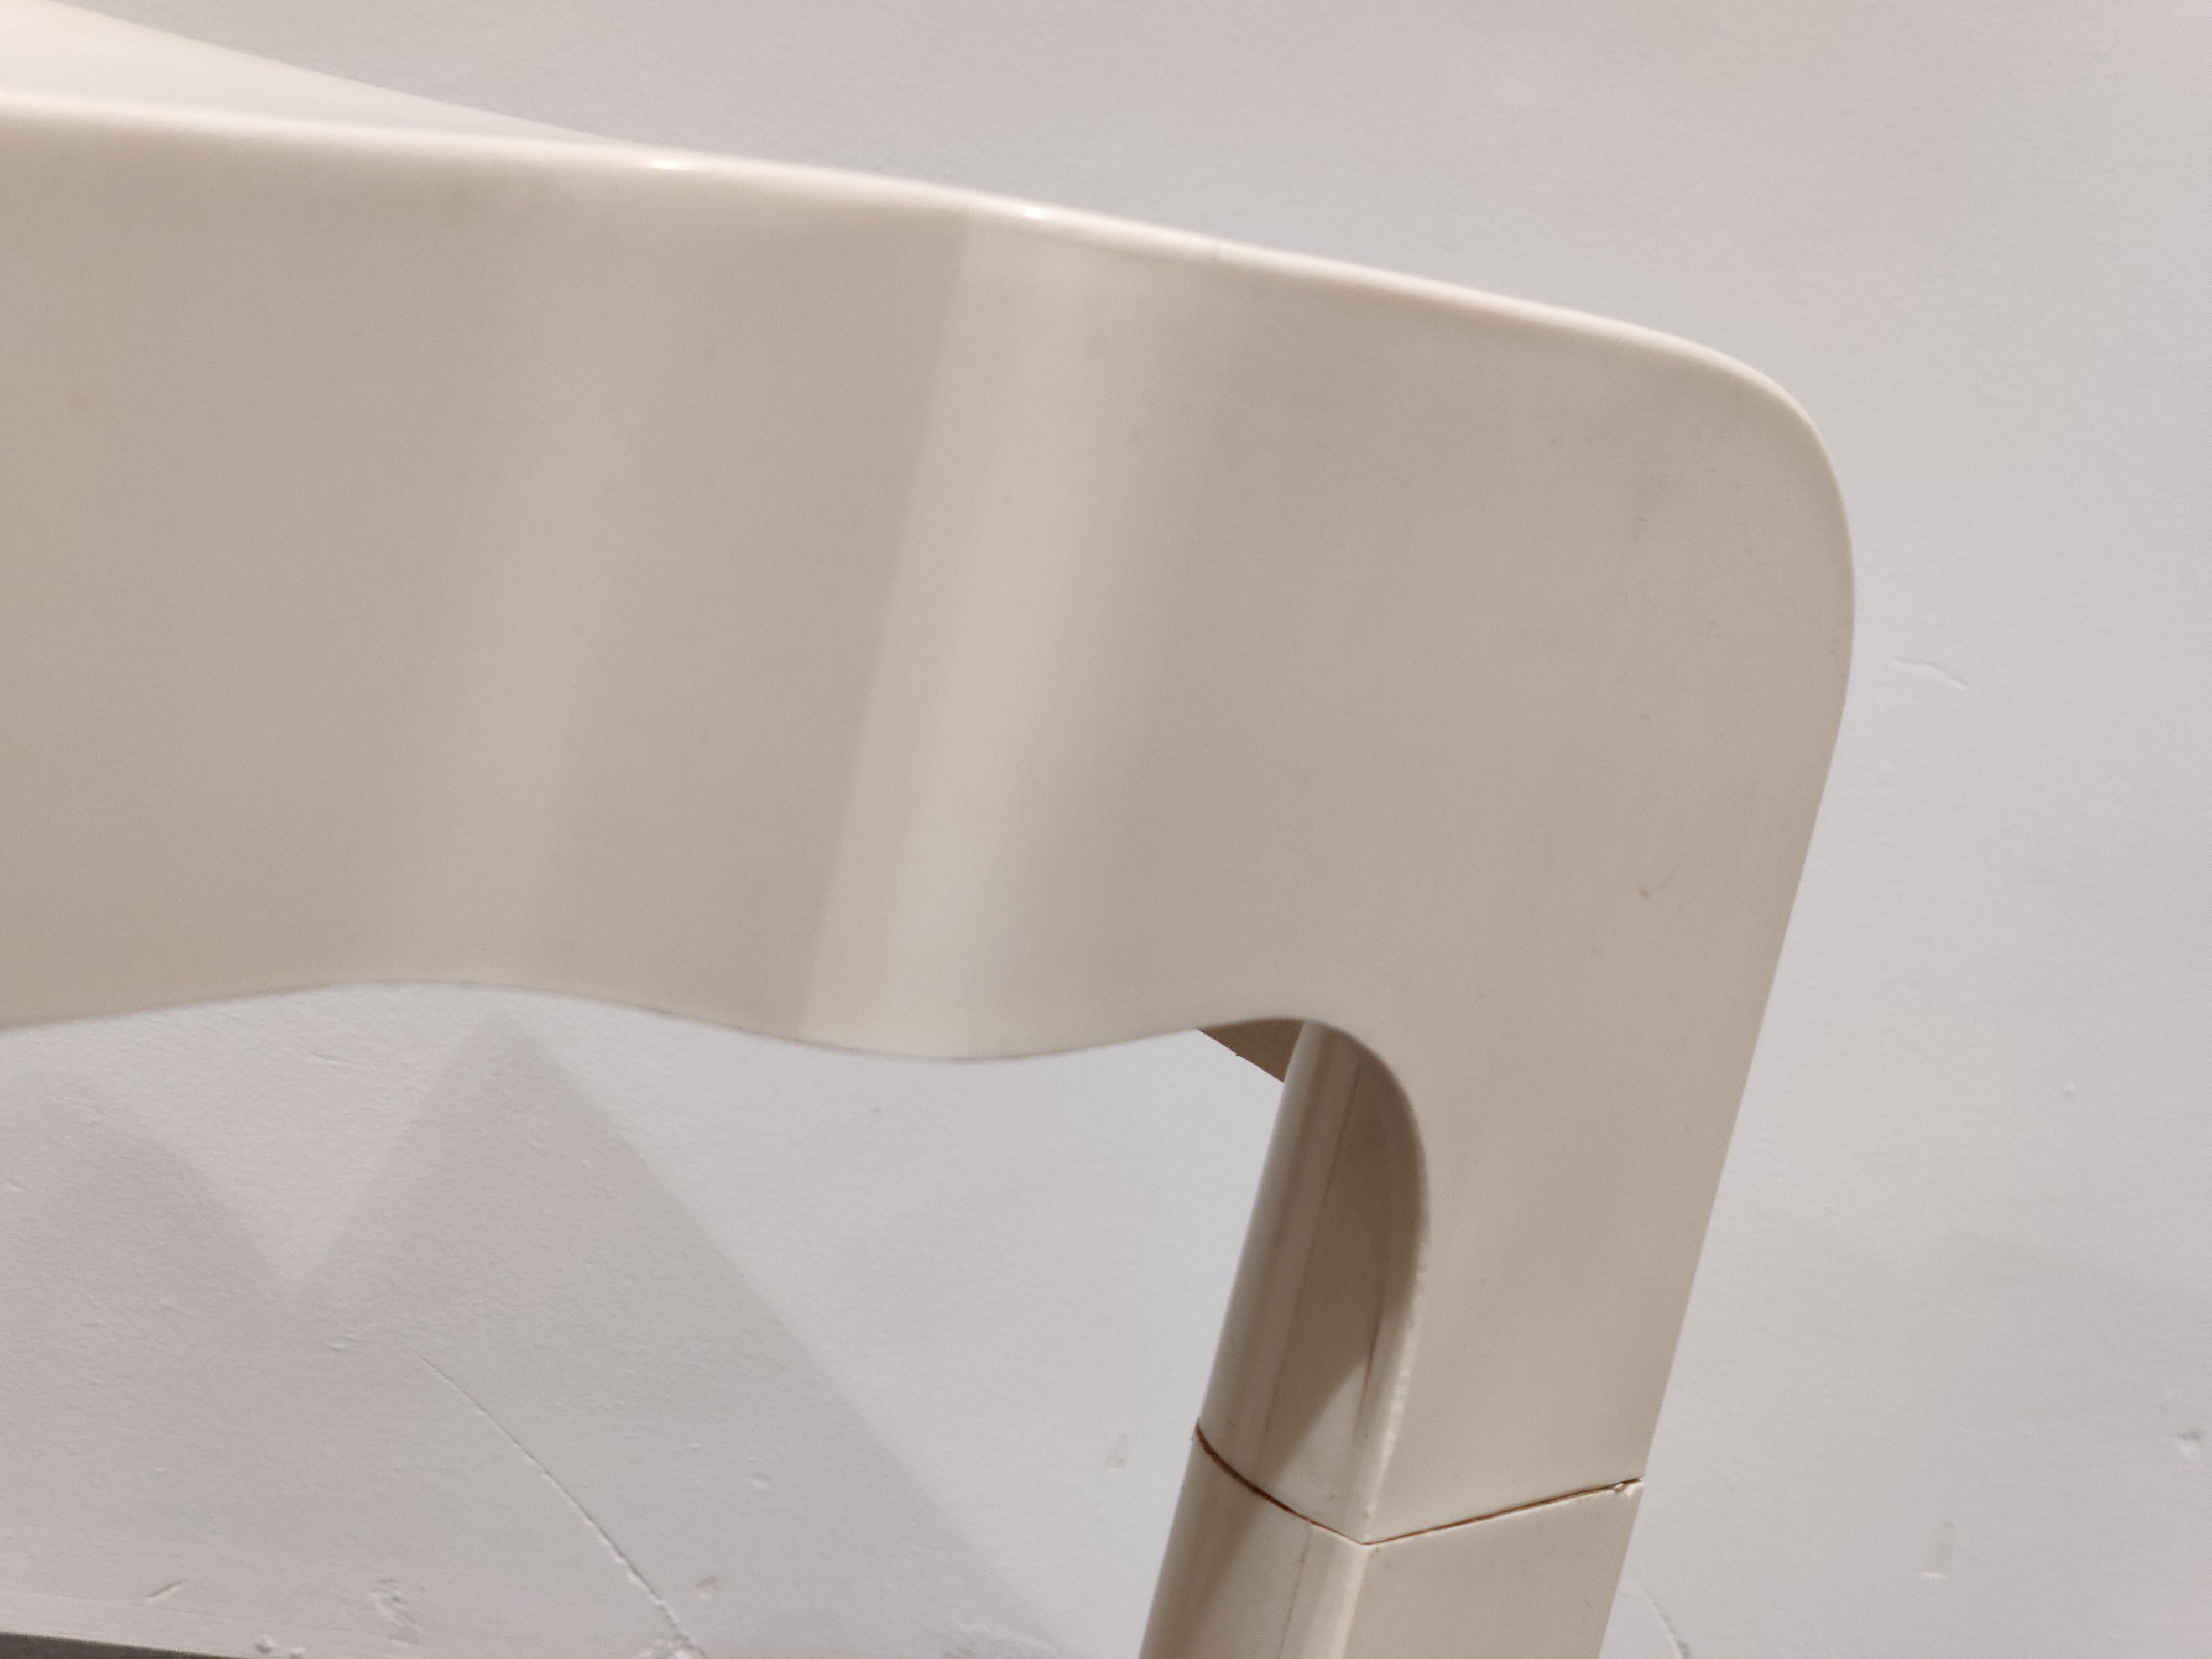 Universal Plastic Chairs Model 4869 by Joe Colombo for Kartell 1